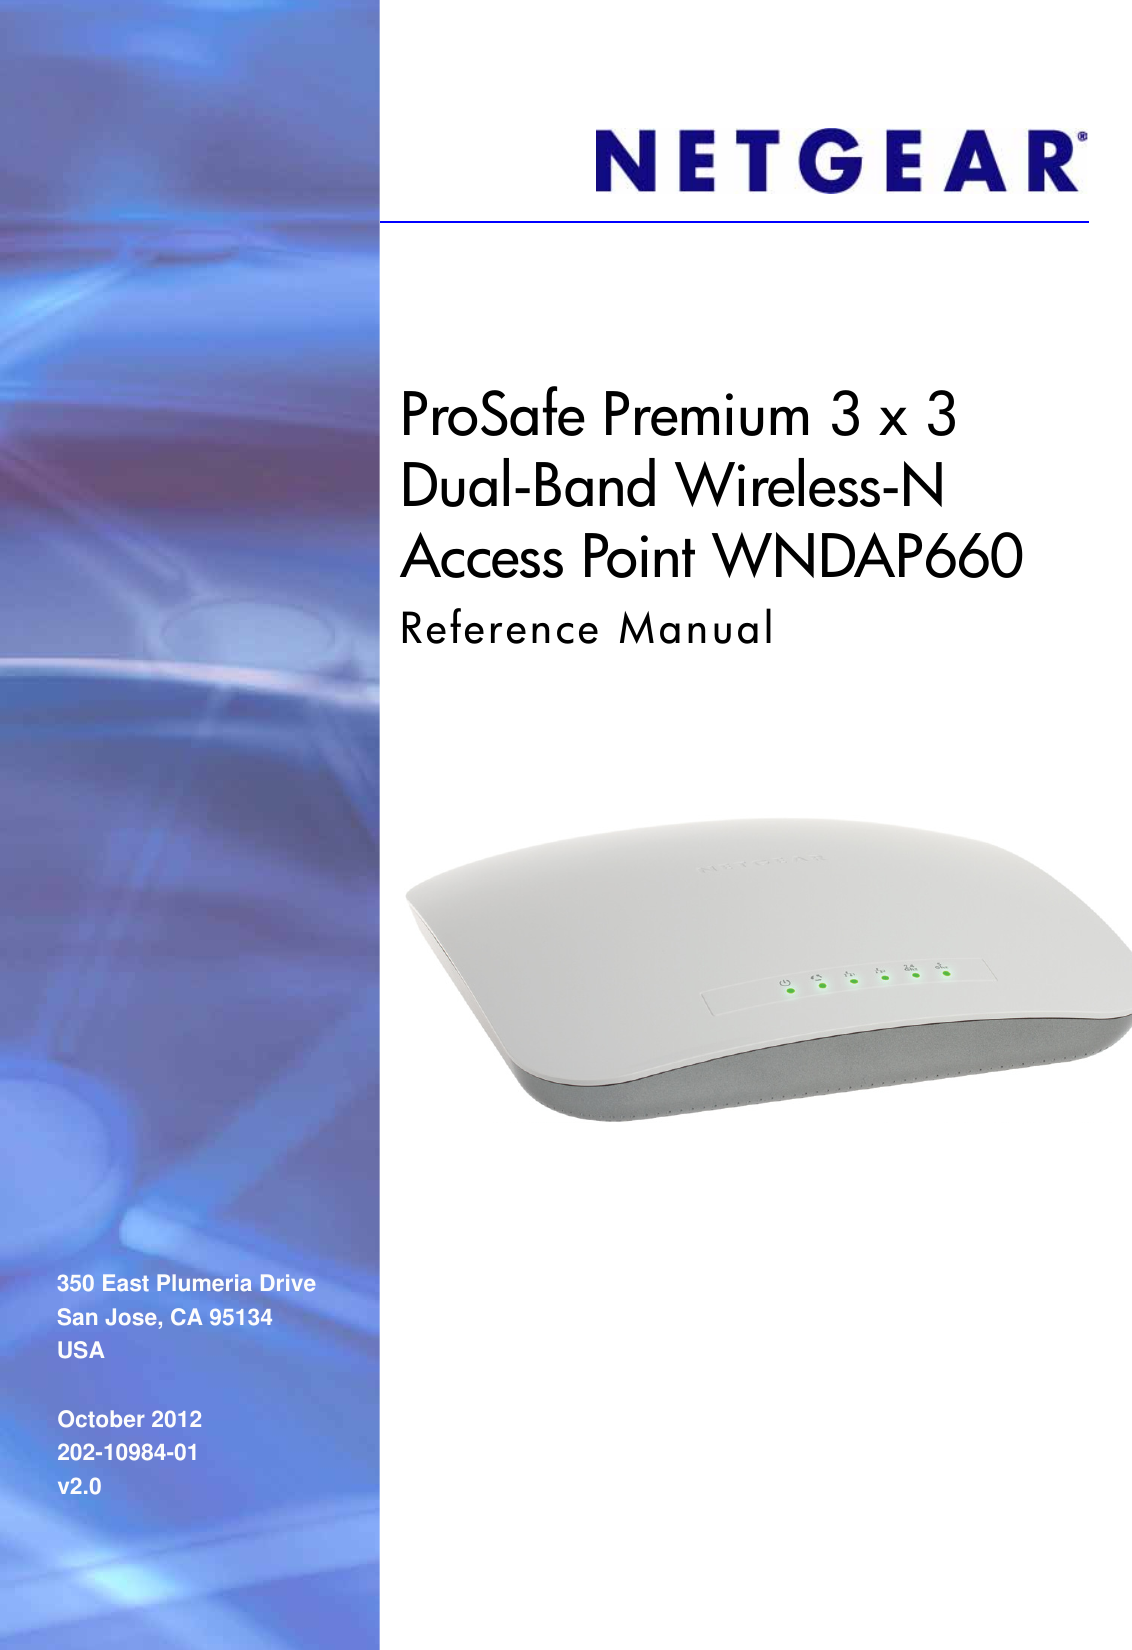 ip address for netgear router and eap 122 is the same